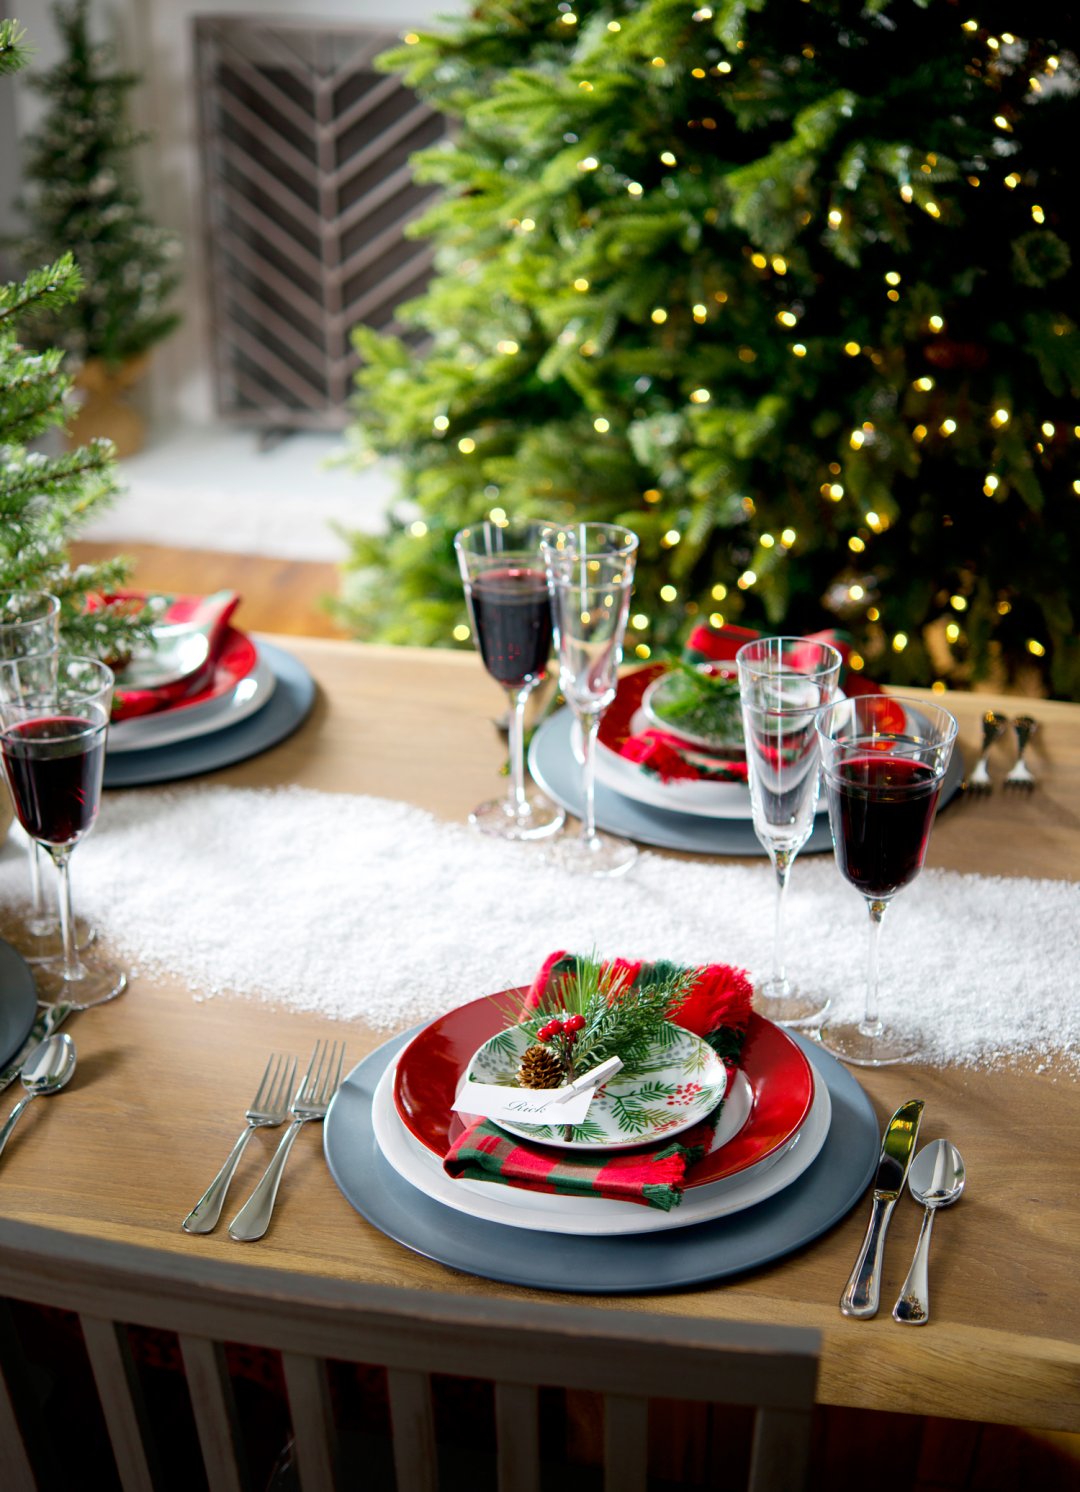 Tabletop Christmas Tree Decor The Crate and Barrel Blog